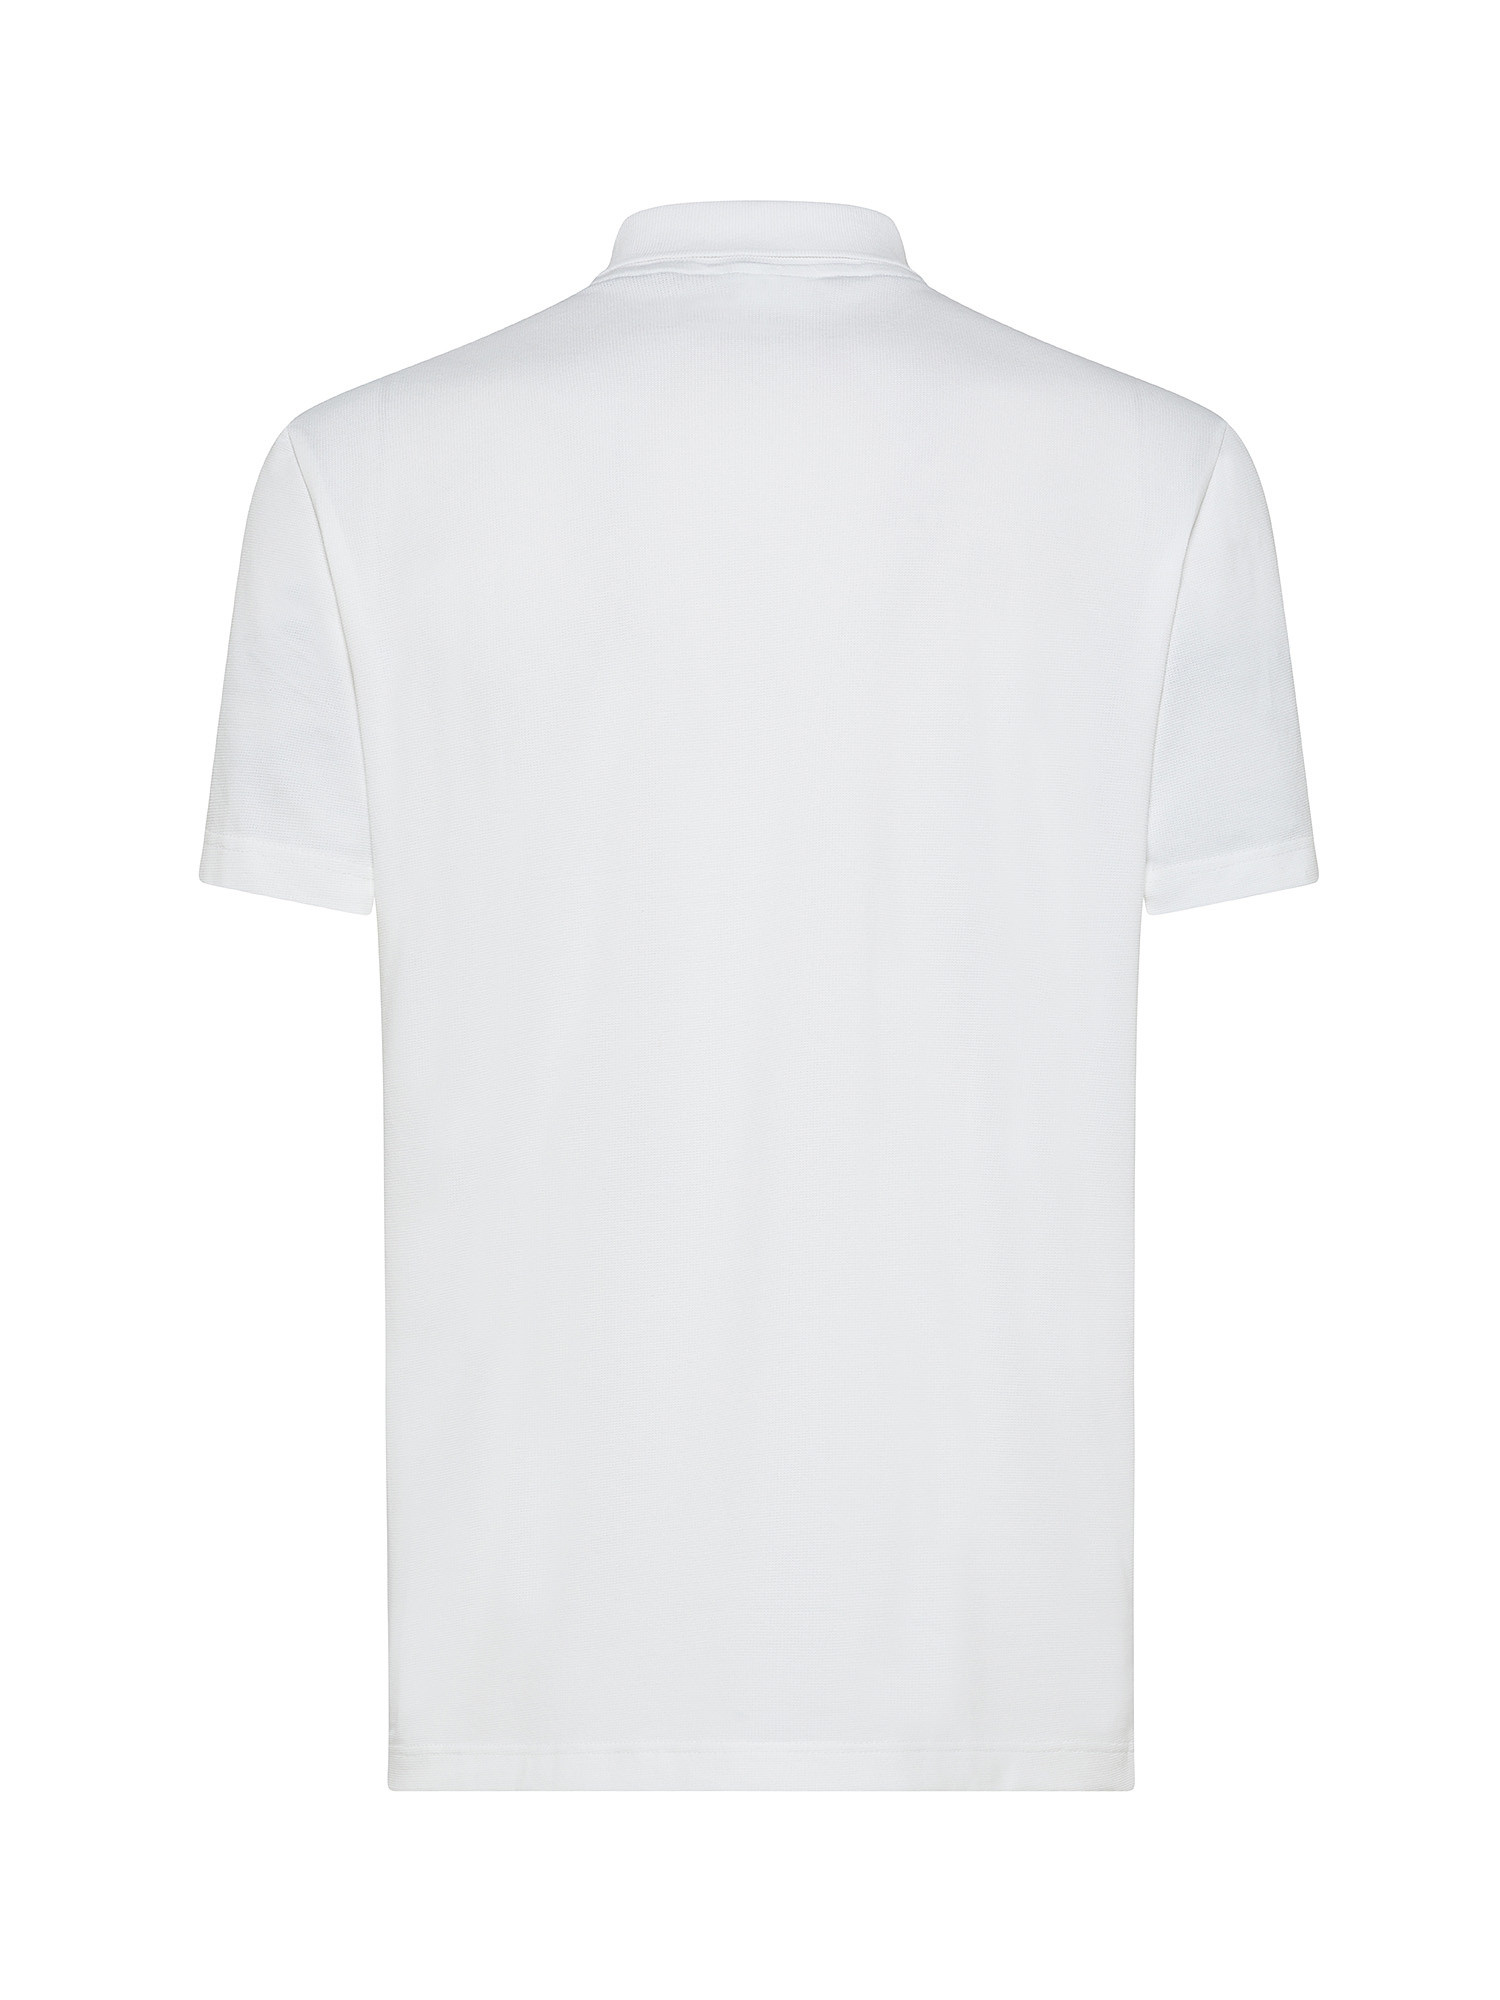 Lacoste - Polo stretch regular fit, Bianco, large image number 1